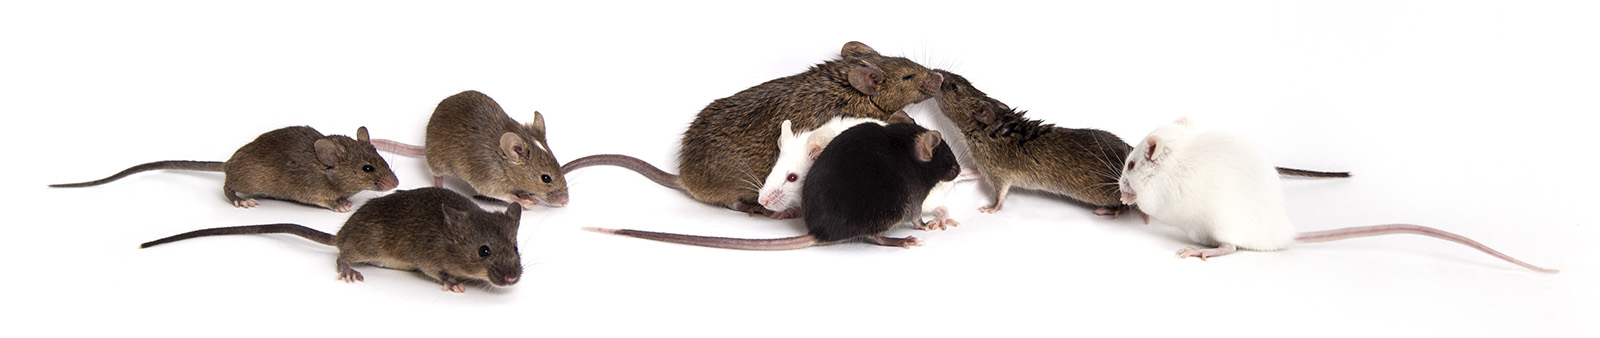 Unlike inbred strains, Diversity Outbred (DO) mice are genetically diverse, allowing more accurate modeling of the human population.